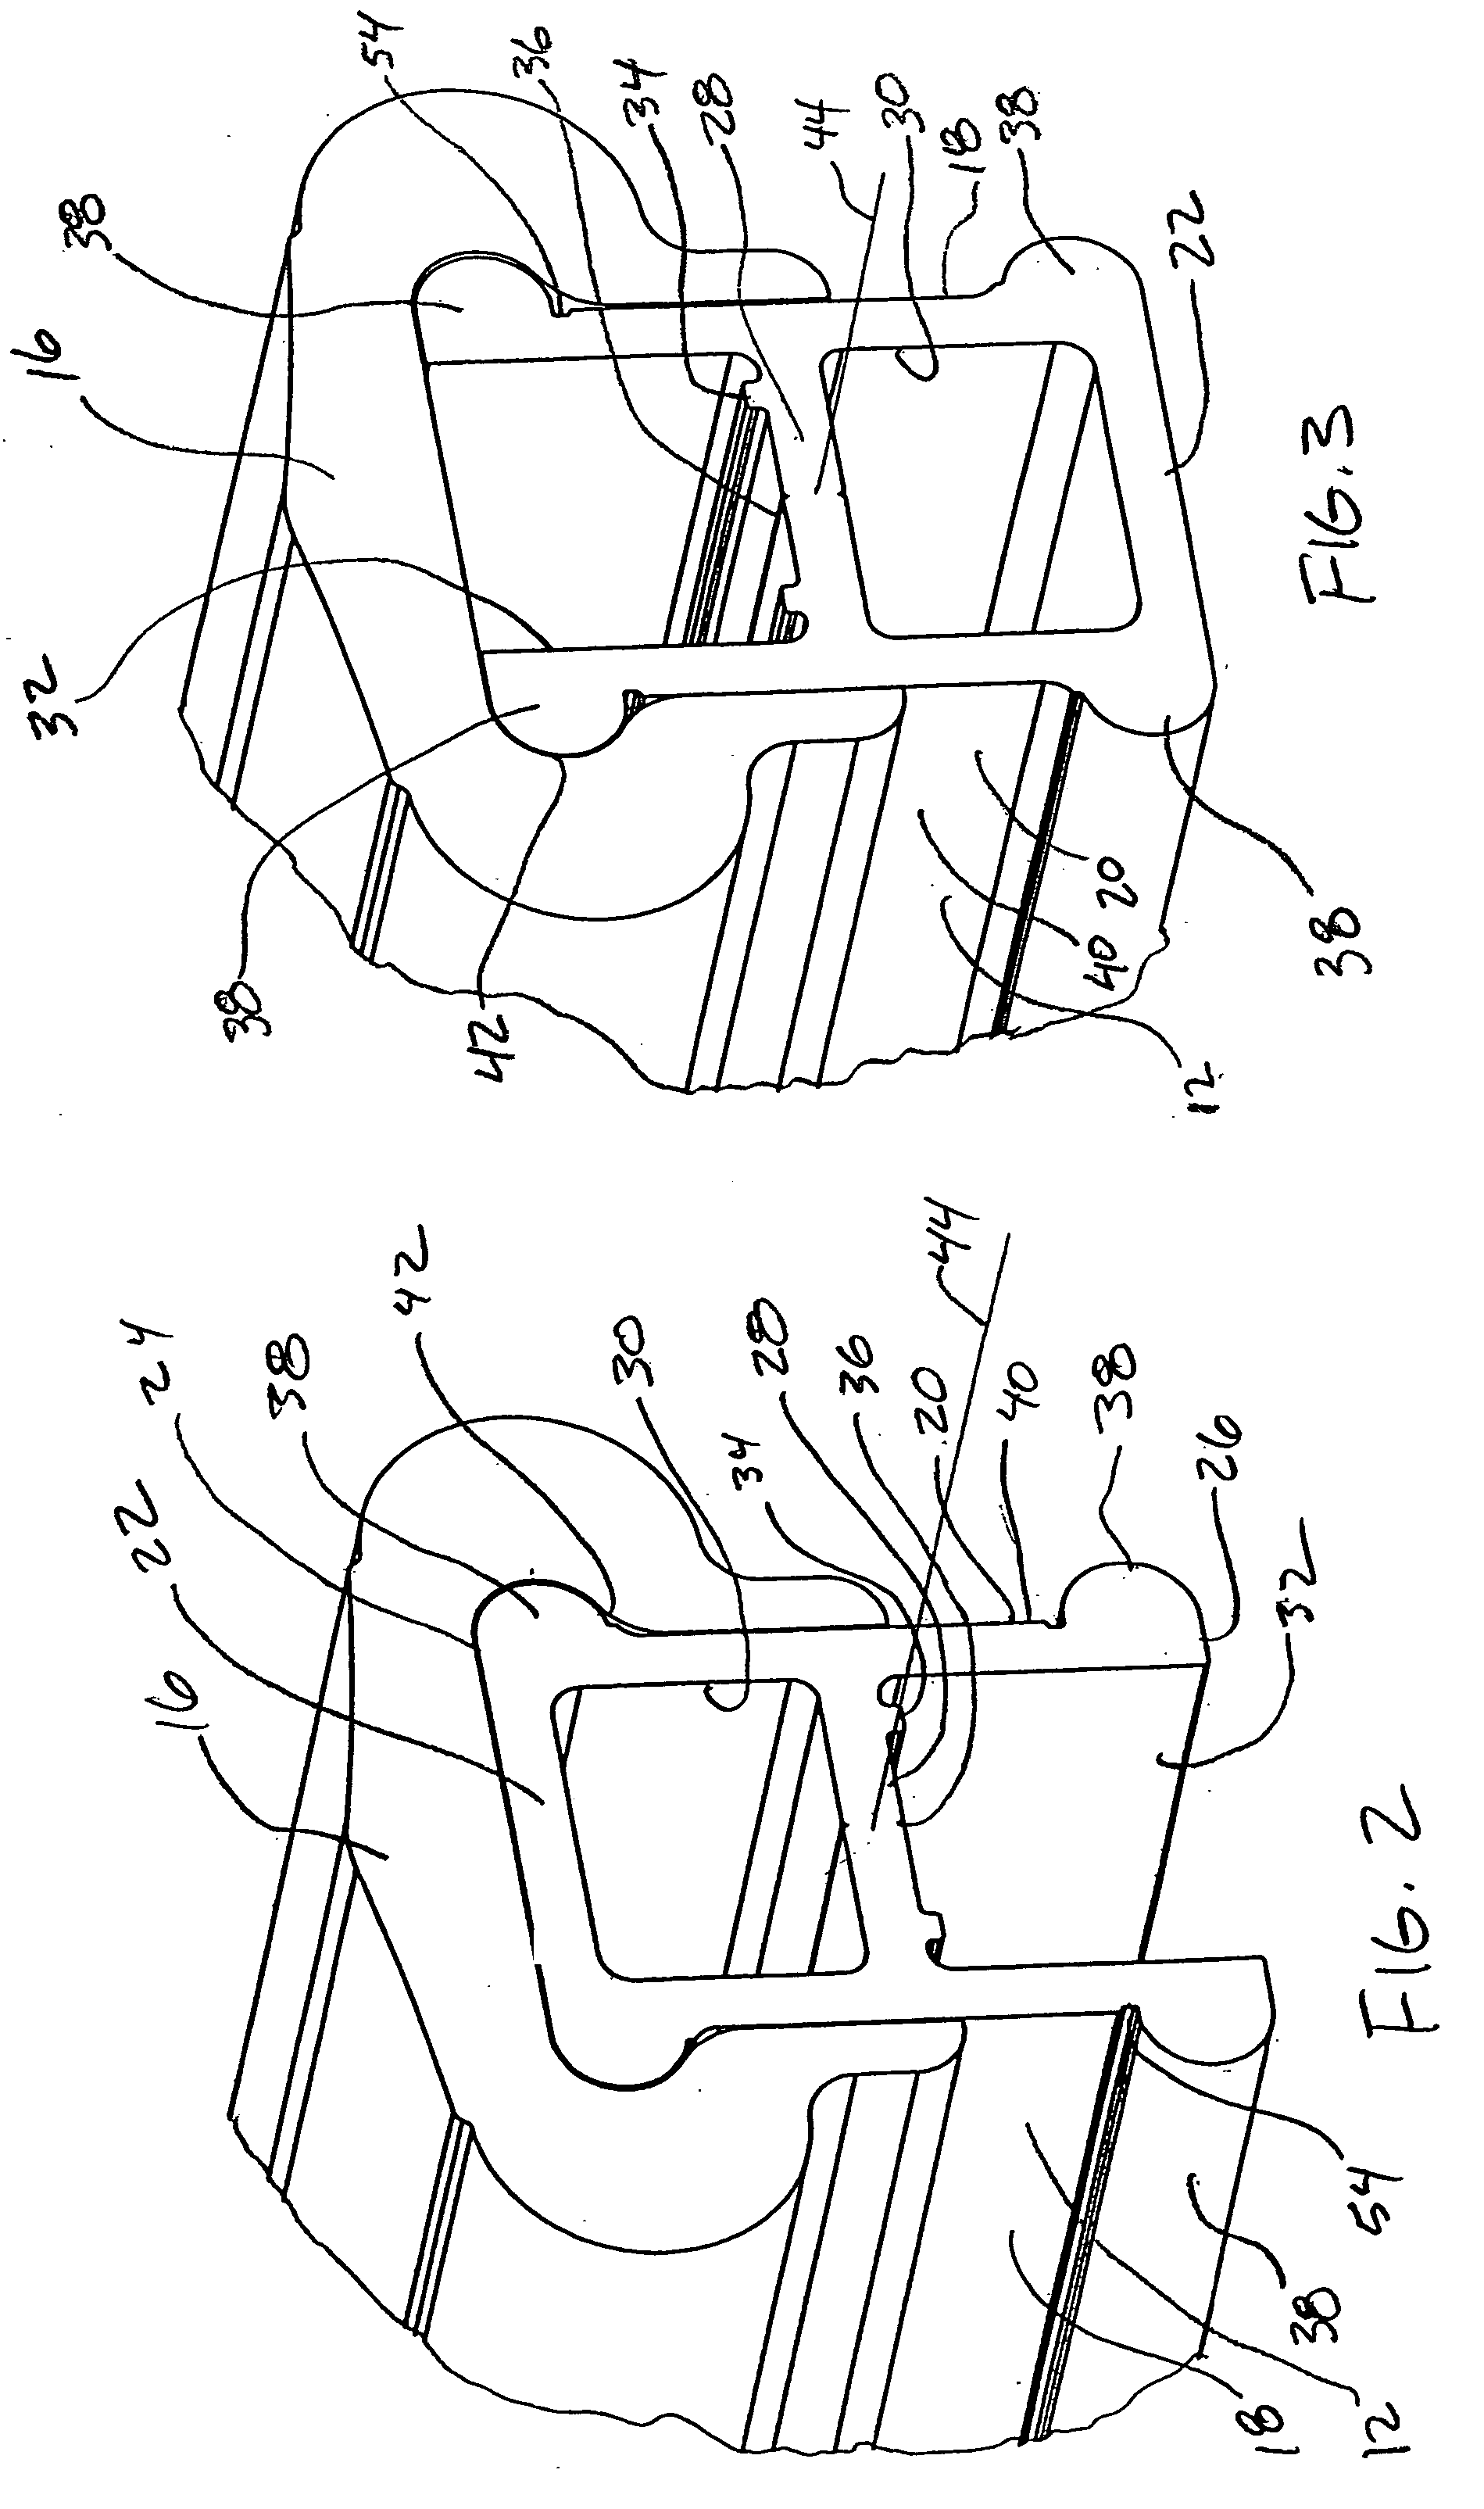 Method of forming a barrier